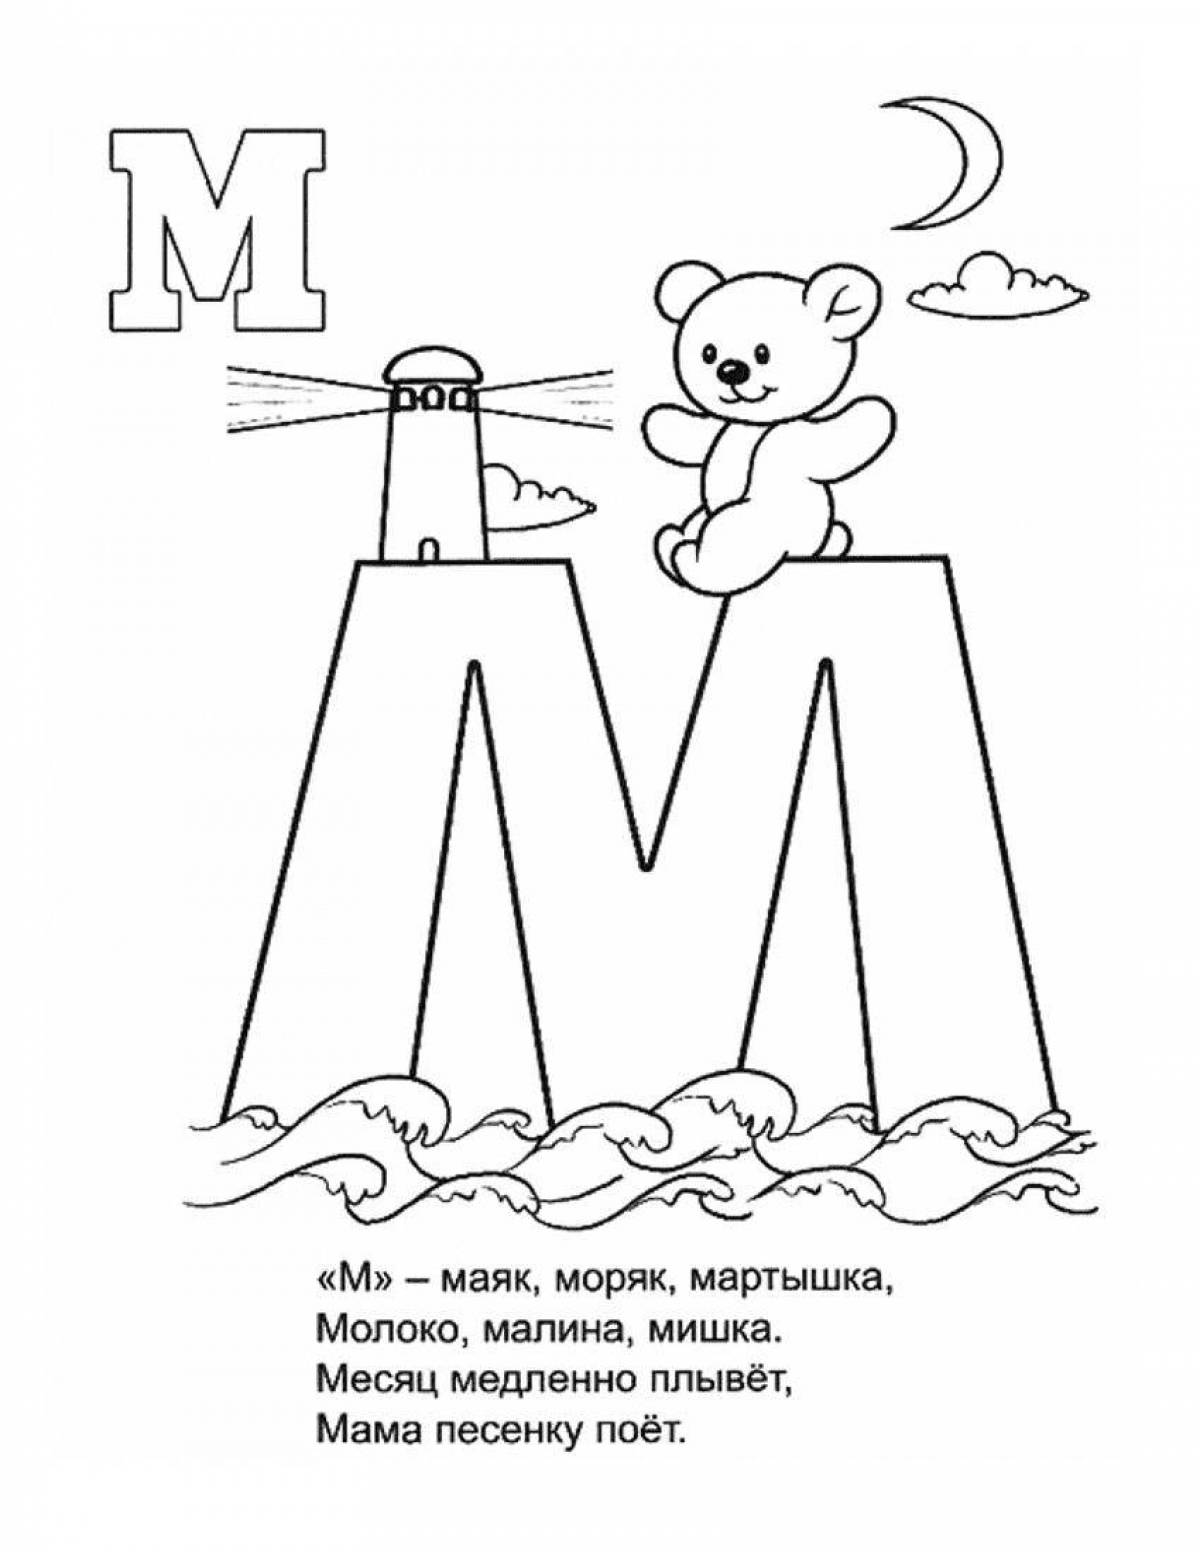 Fun letter m coloring for kids